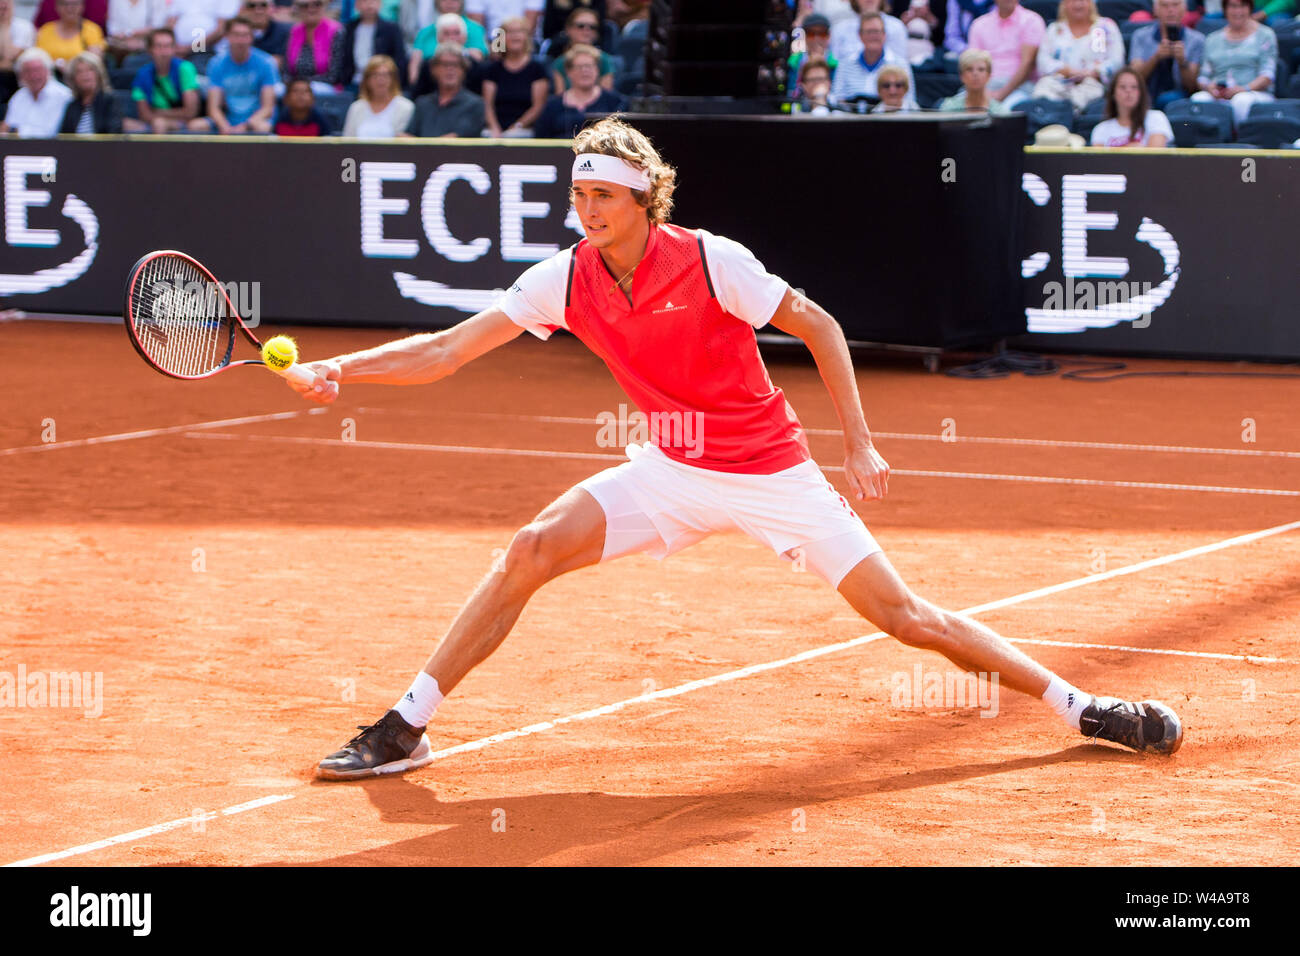 Hamburg, Germany. 21st July, 2019. Tennis, Hamburg European Open at the  Rothenbaum stadium, show match: Alexander Zverev from Germany plays with  Schett-Eagle from Austria against Massu from Chile and Majoli from Croatia.